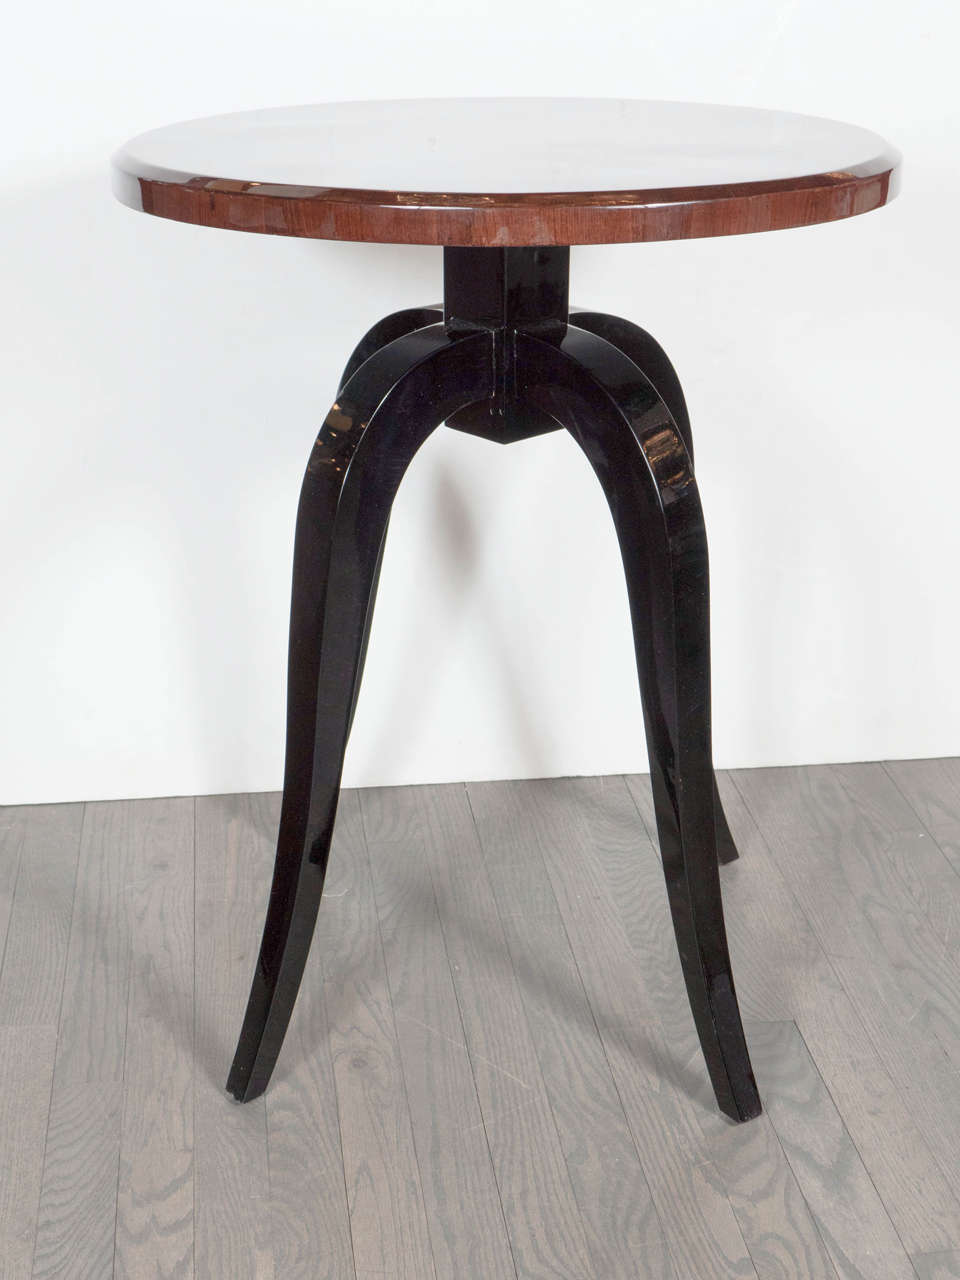 This elegant pair of Art Deco gueridon tables are truly exquisite . They feature a gorgeous starburst inlay design top in book matched walnut, burled carpathian elm in a starburst design pattern.The tops rests on tapered elegant curved  black